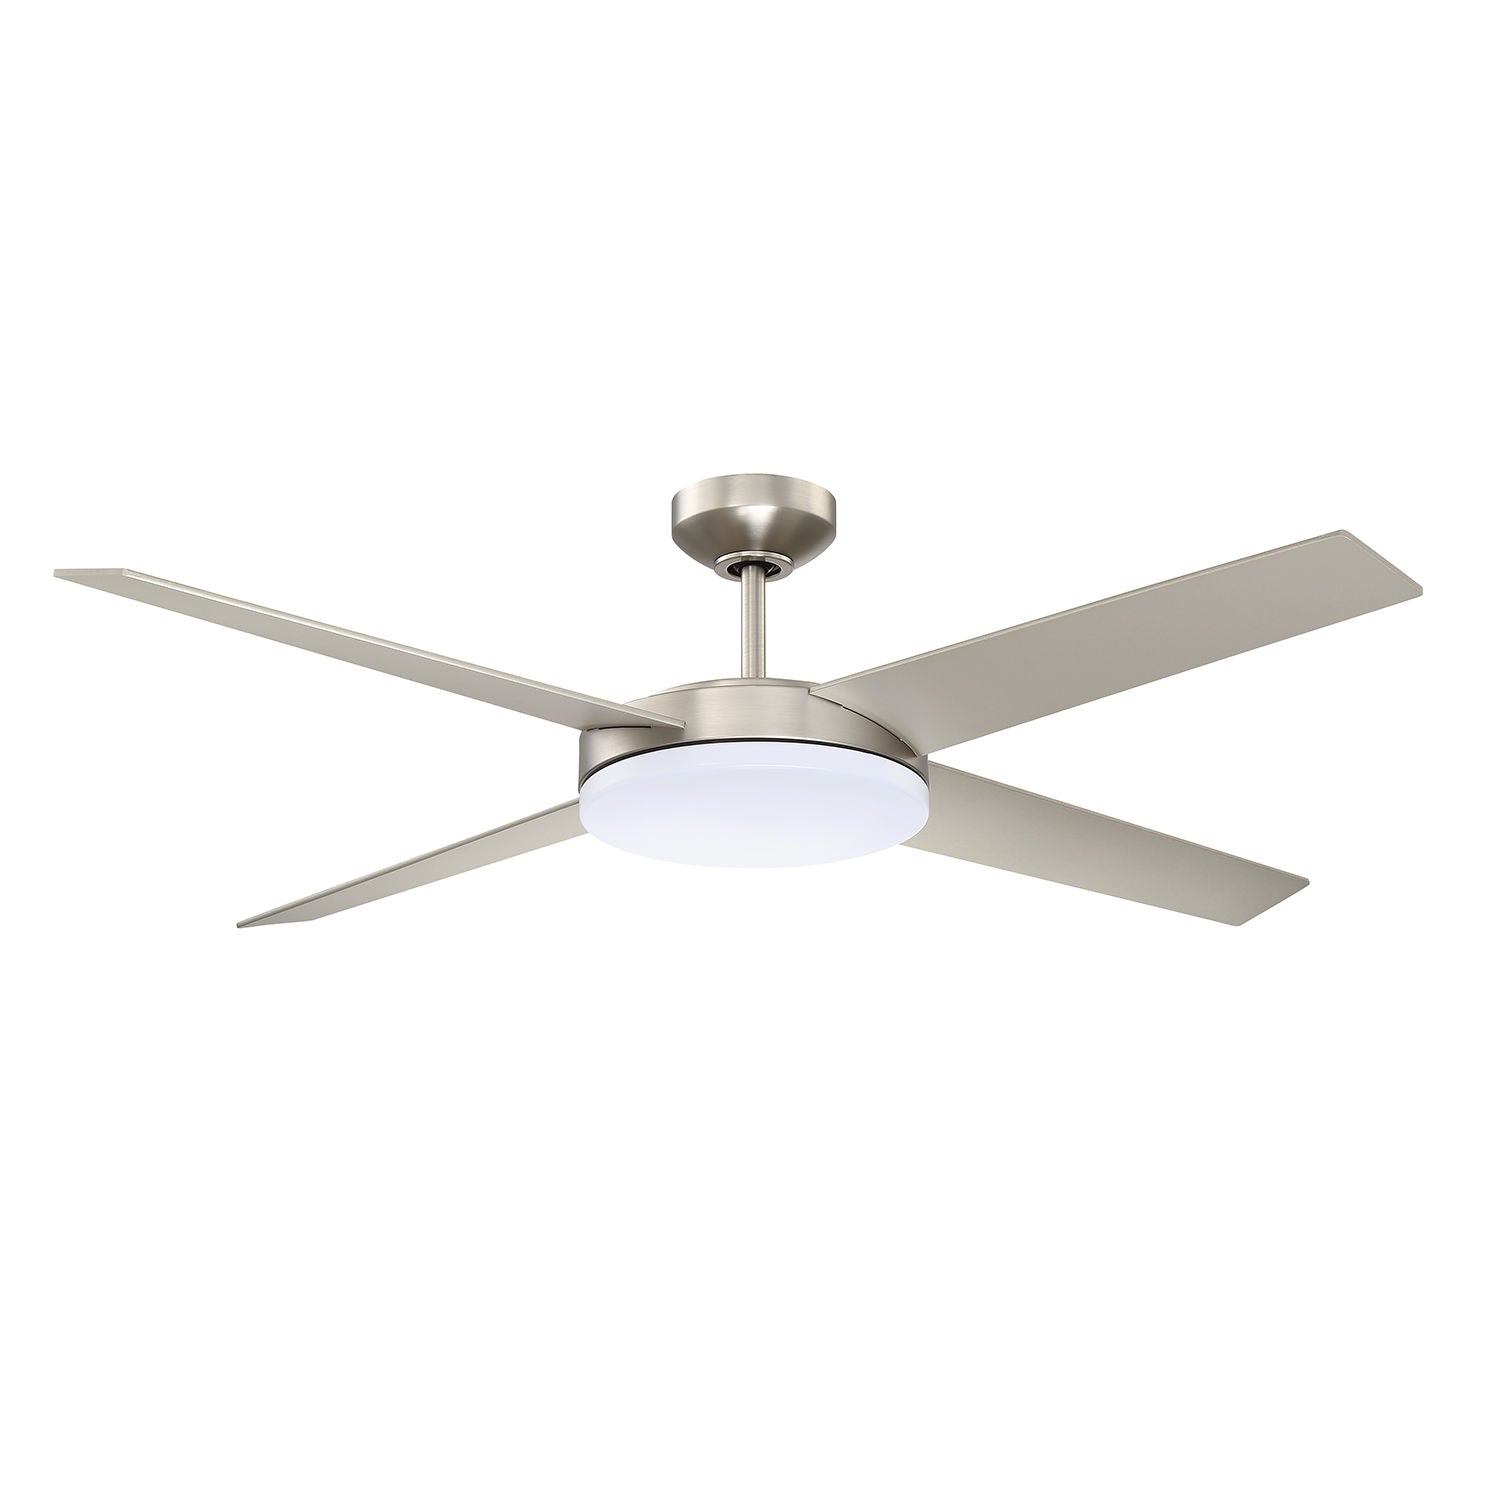 LOPRO Ceiling fan Stainless steel INTEGRATED LED - AC21352-SN | KENDAL